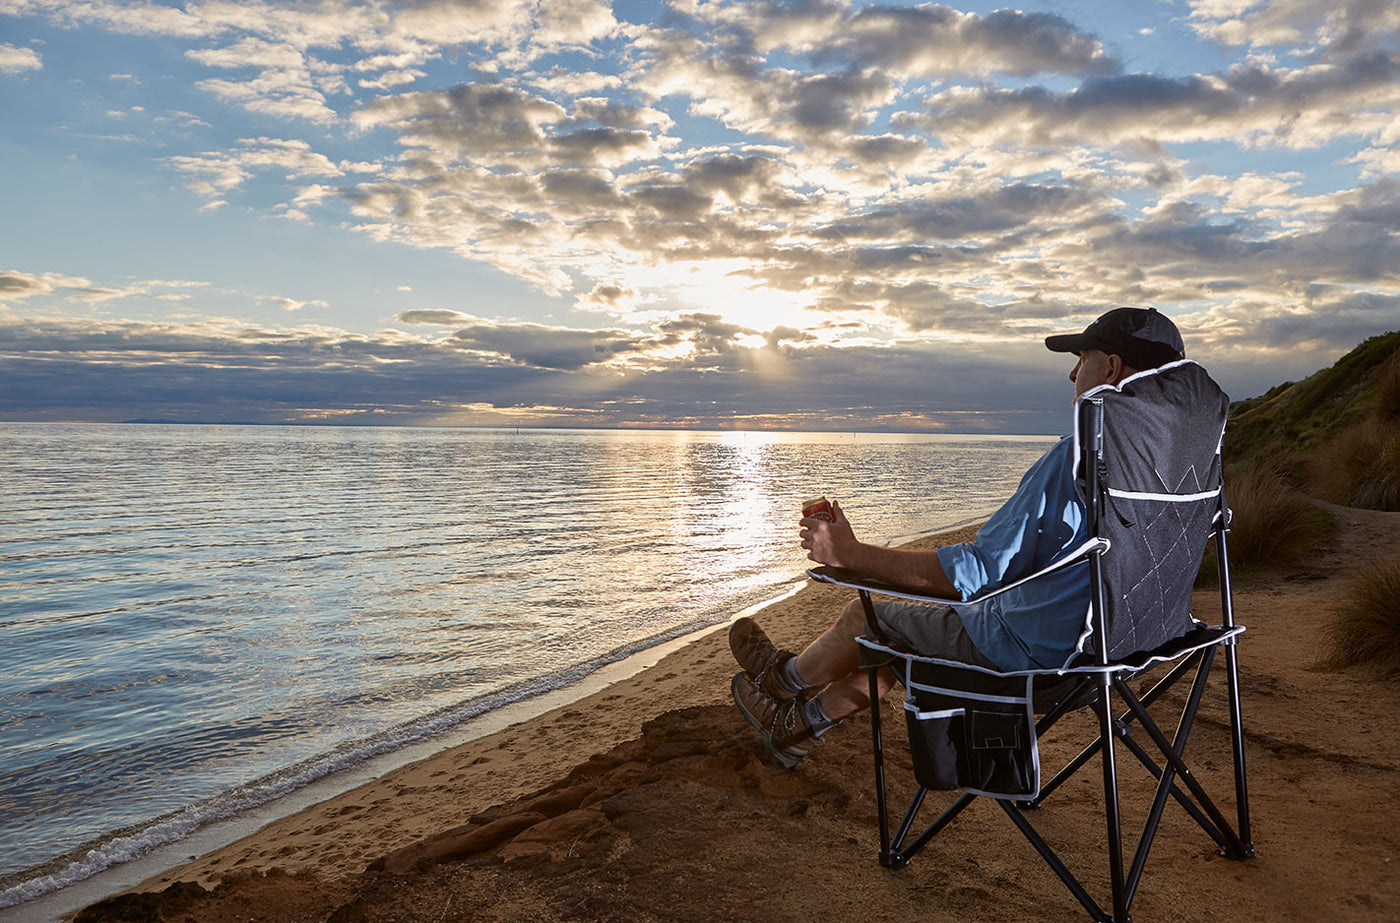 How to Look After Your Camp Chair